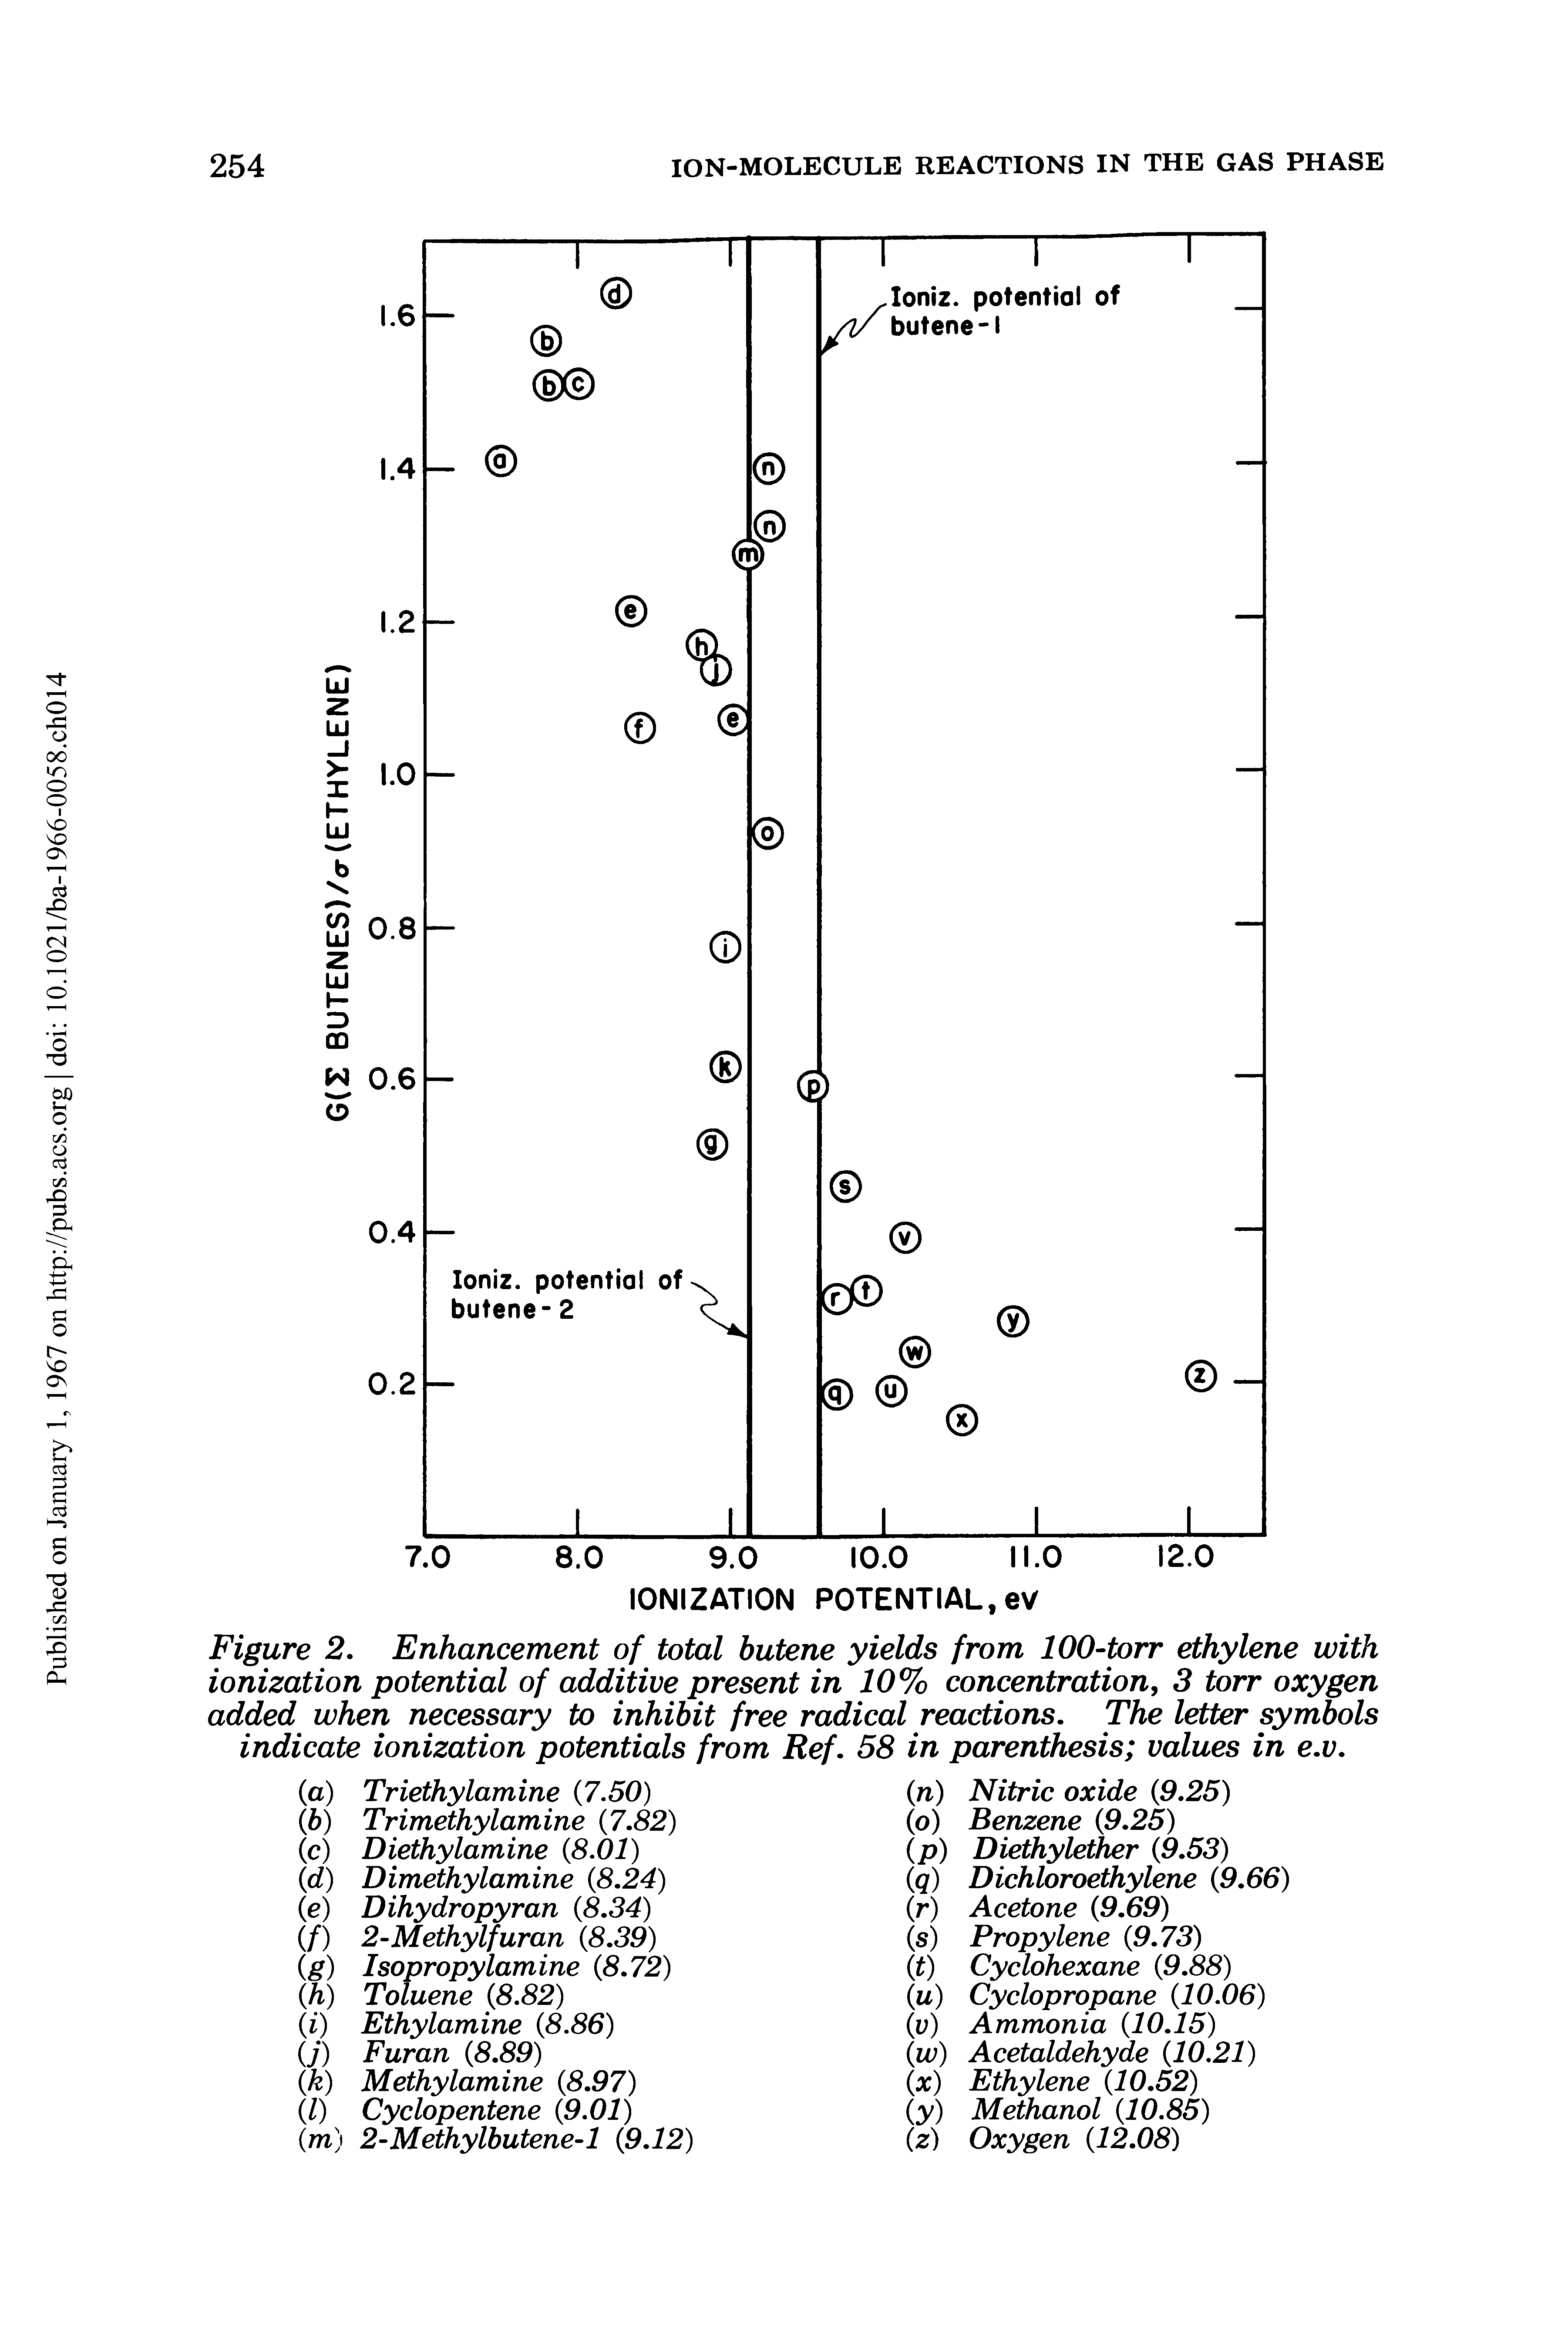 Figure 2. Enhancement of total butene yields from 100-torr ethylene with ionization potential of additive present in 10% concentration, 3 torr oxygen added when necessary to inhibit free radical reactions. The letter symbols indicate ionization potentials from Ref. 58 in parenthesis values in e.v.